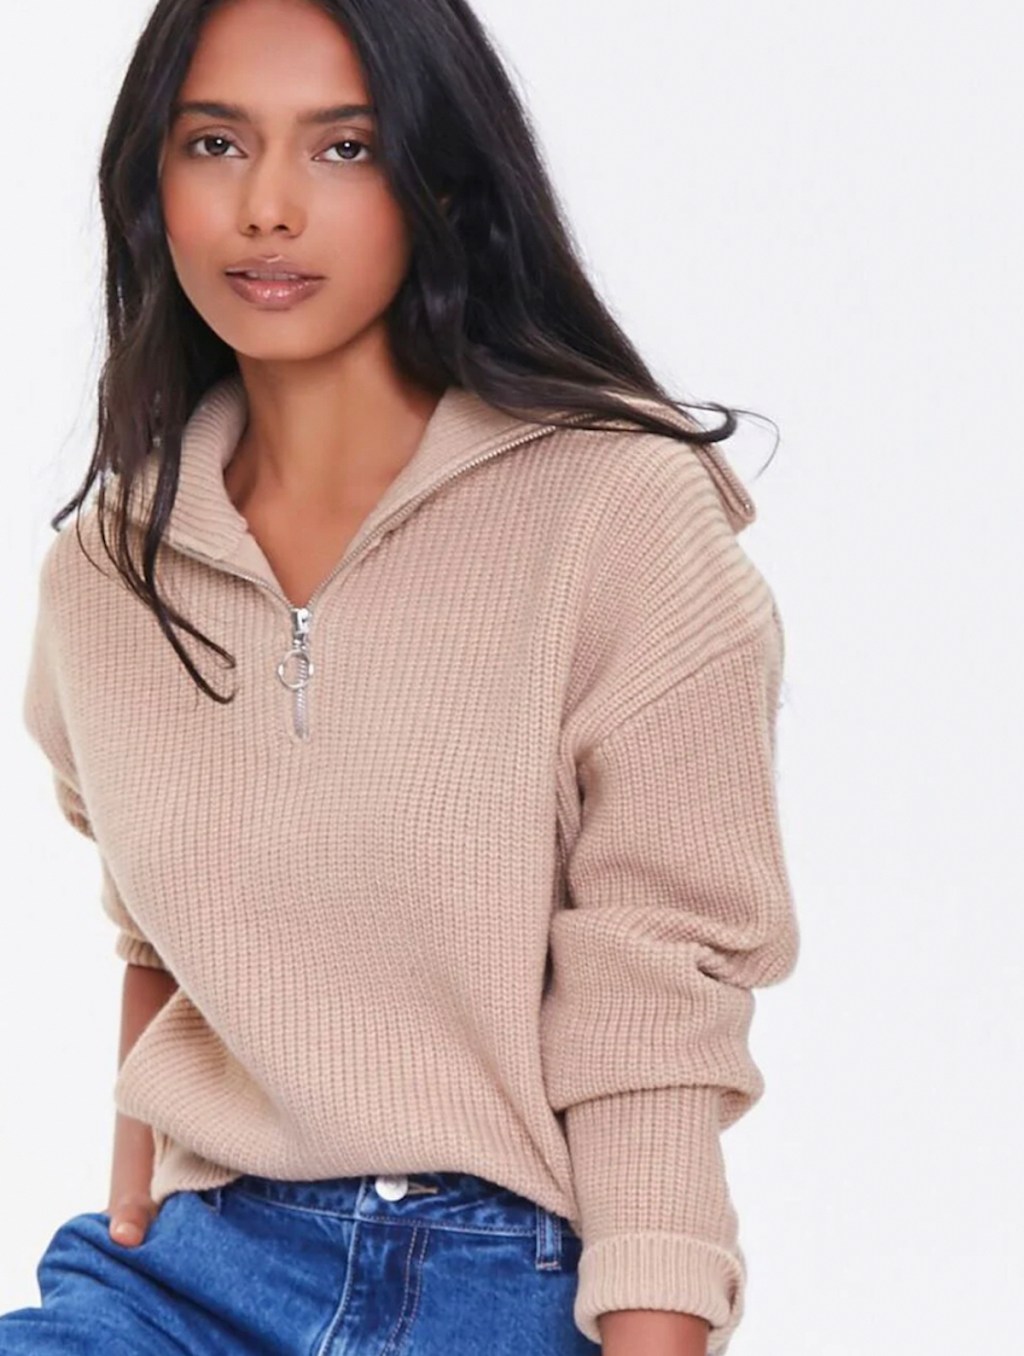 anthropologie clothes woman posing in pink half zip pullover